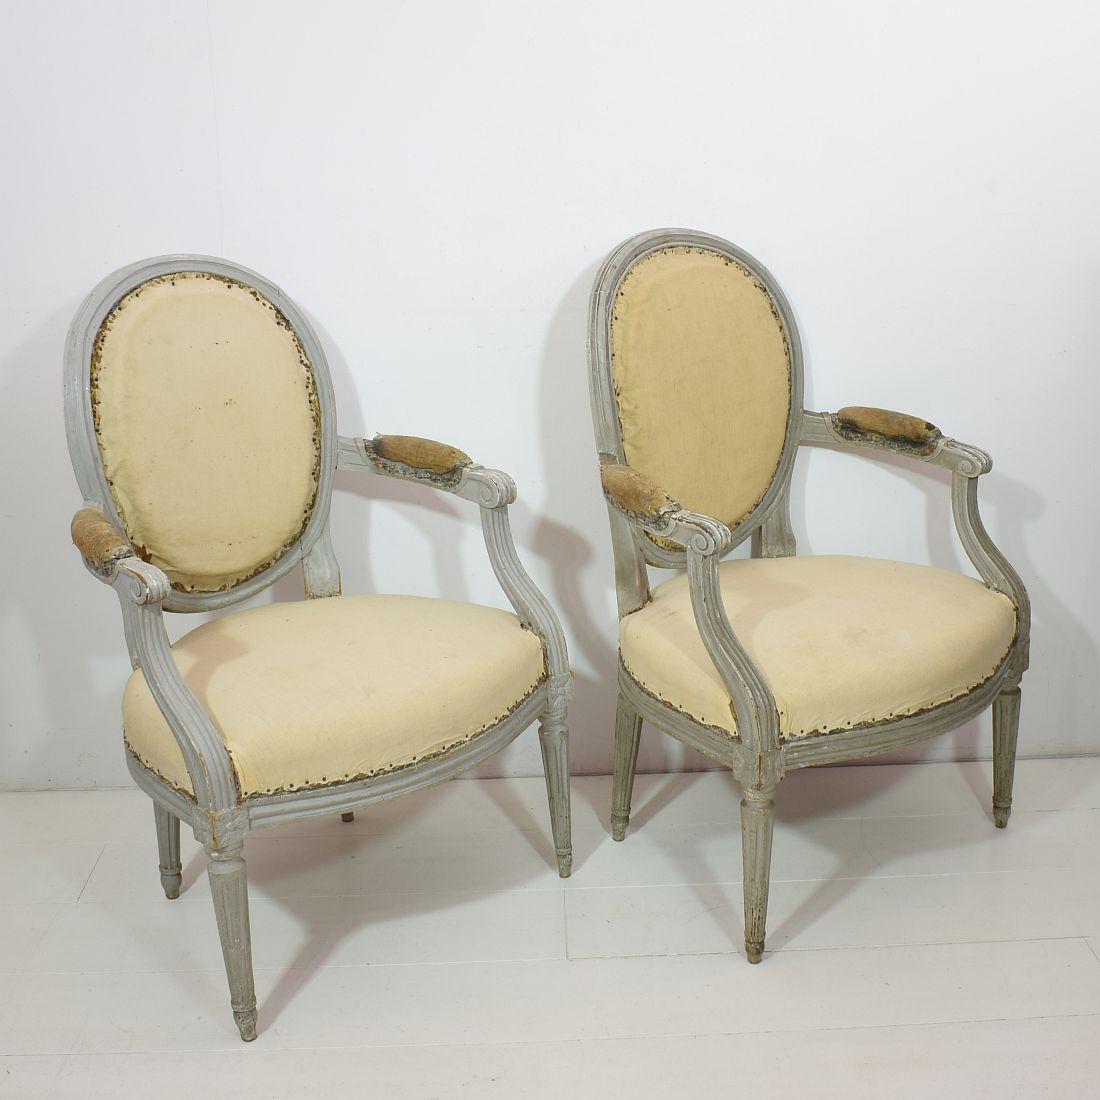 Hand-Crafted 18th Century French Pair of Louis XVI Chairs